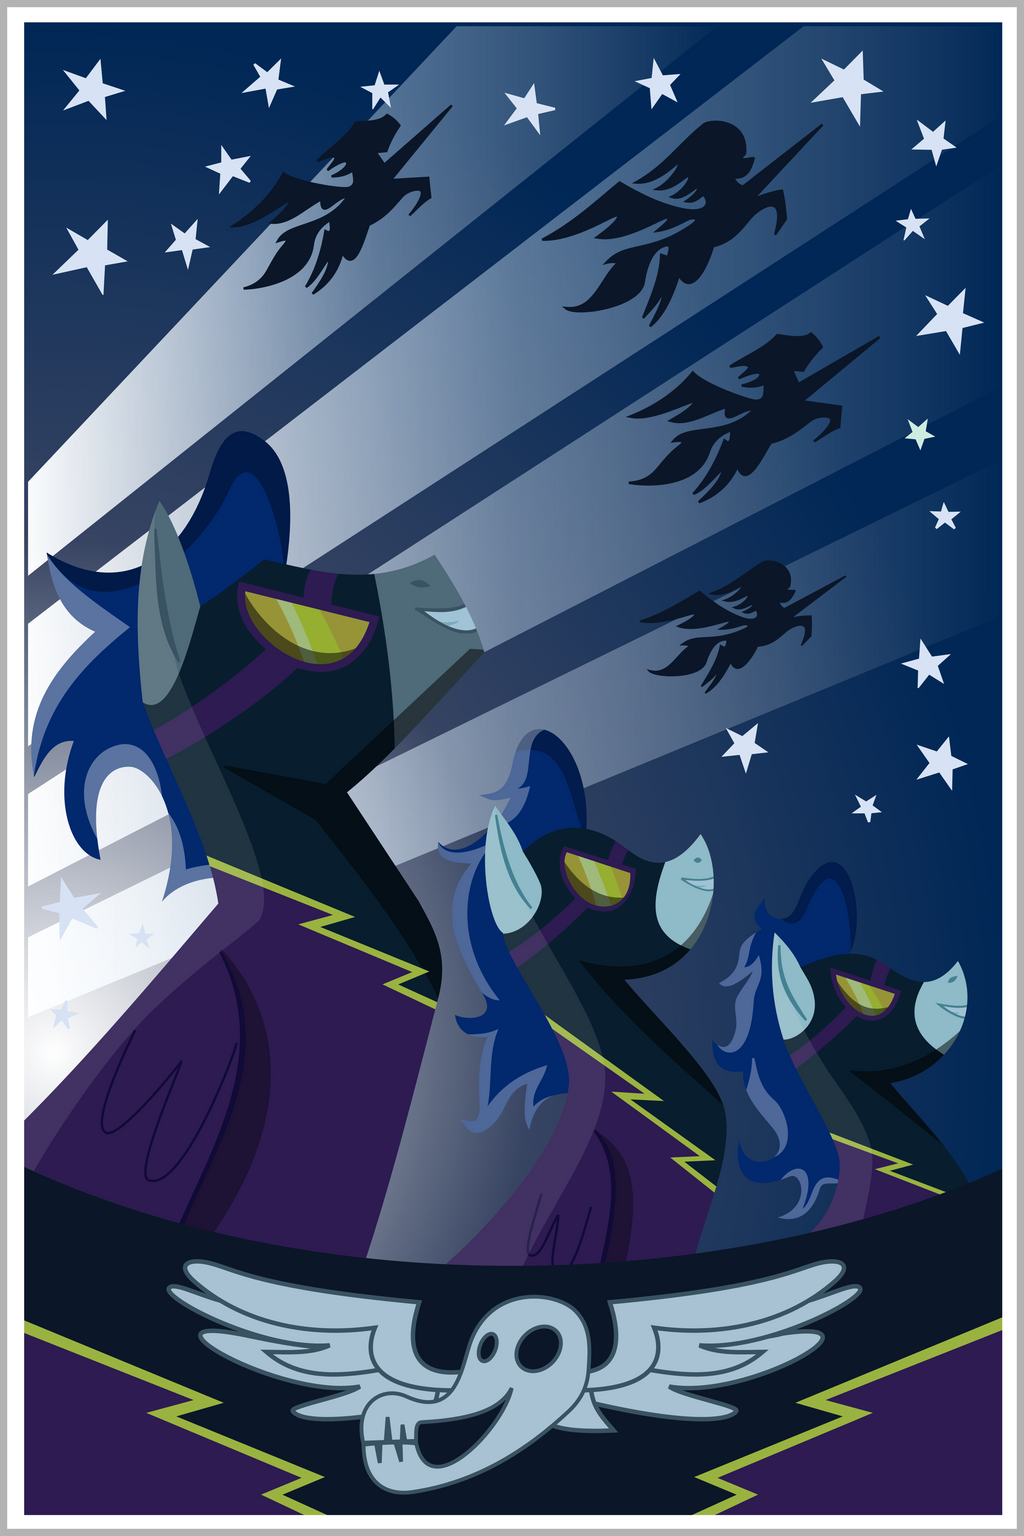 shadowbolts_by_zapapplejam-d4pw38p.png